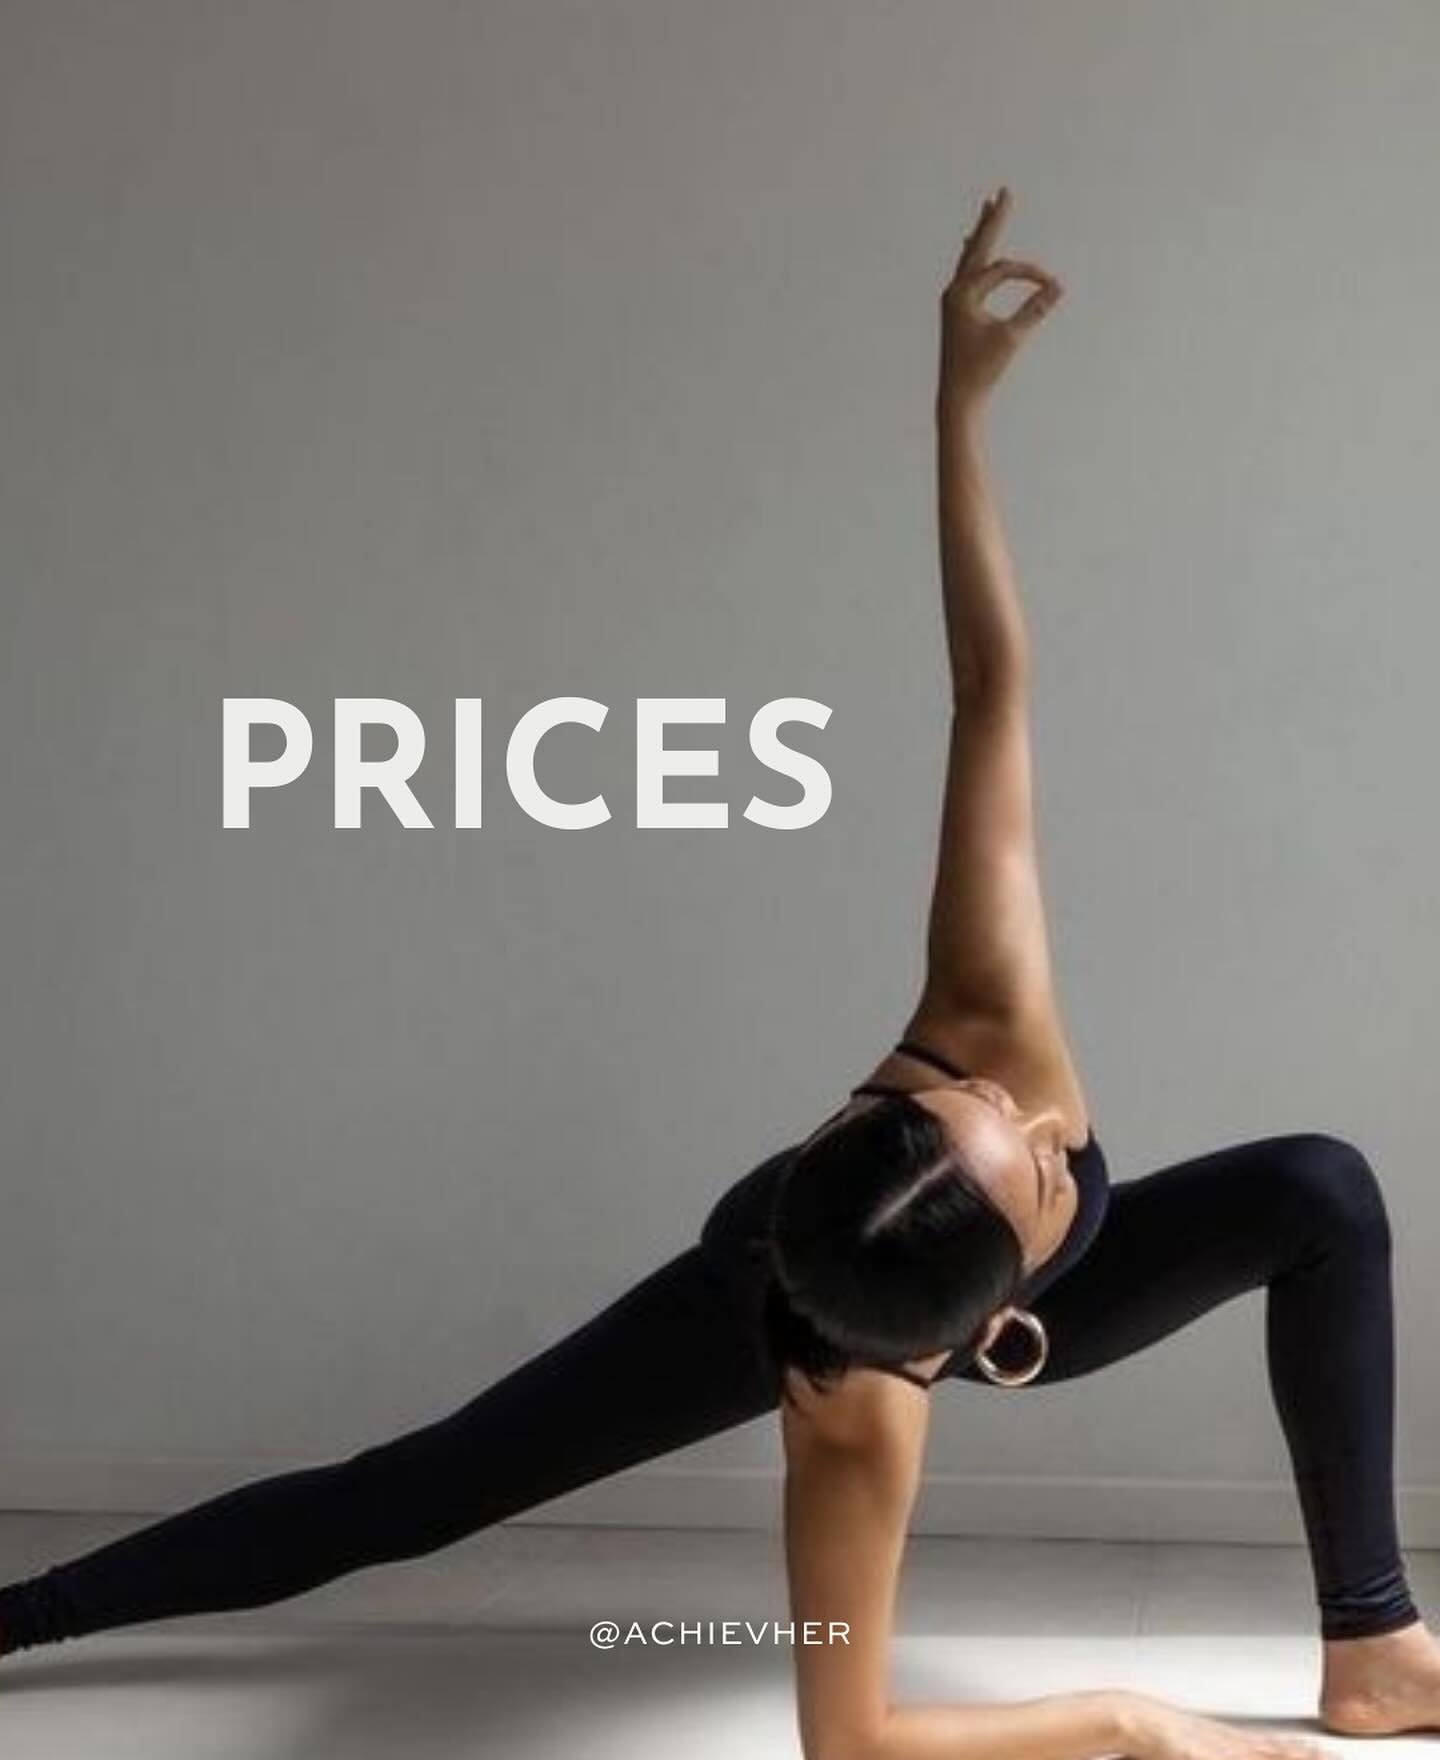 Investing in your well-being ✨
⠀
We&rsquo;ve made our class pricing transparent and accessible so you can find the perfect fit for your goals and budget. Explore our class options, listen to your body, release tension, and connect with your emotional